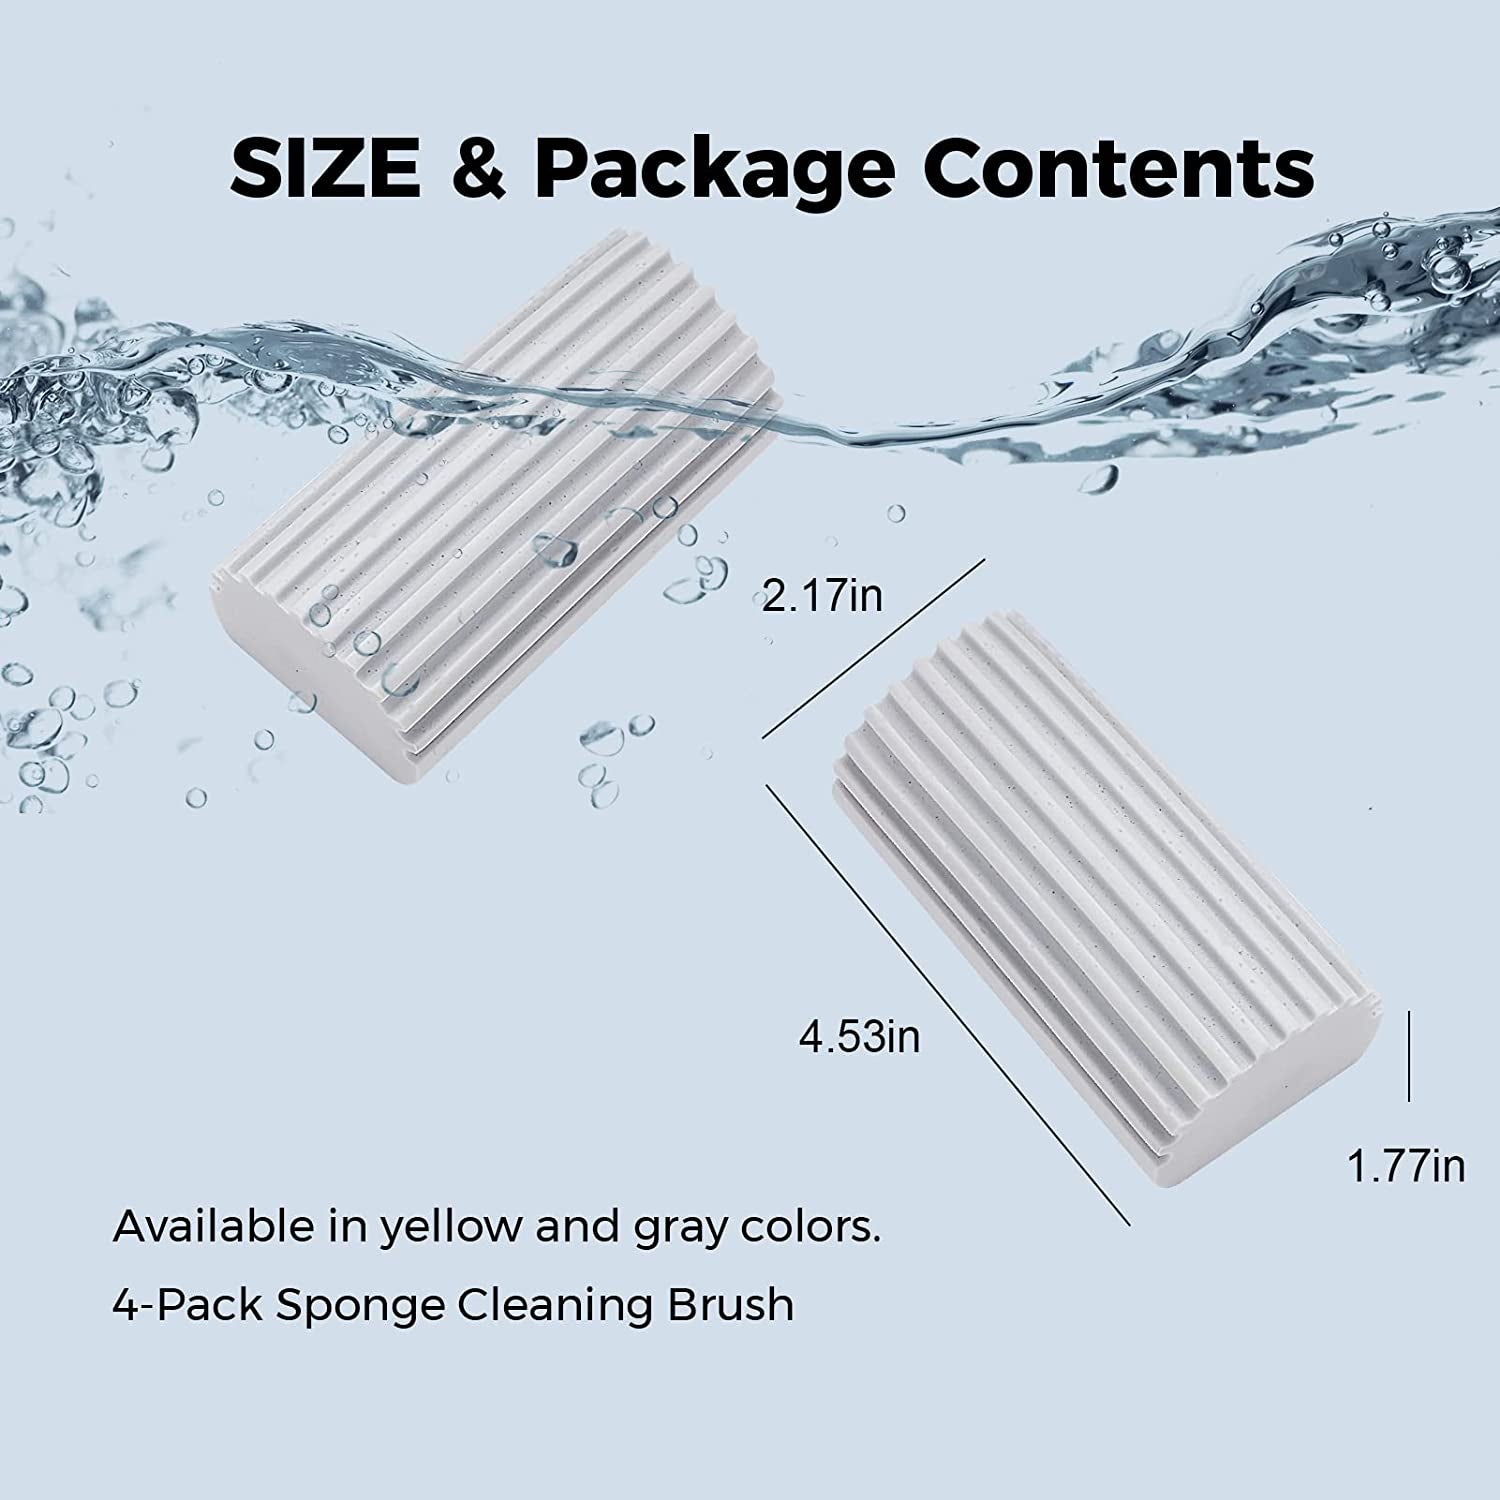 4-Pack Damp Clean Duster Sponge, Sponge Cleaning Brush, Duster for Cleaning Blinds, Glass, Baseboards, Vents, Railings, Mirrors, Window Track Grooves and Faucets (Grey)